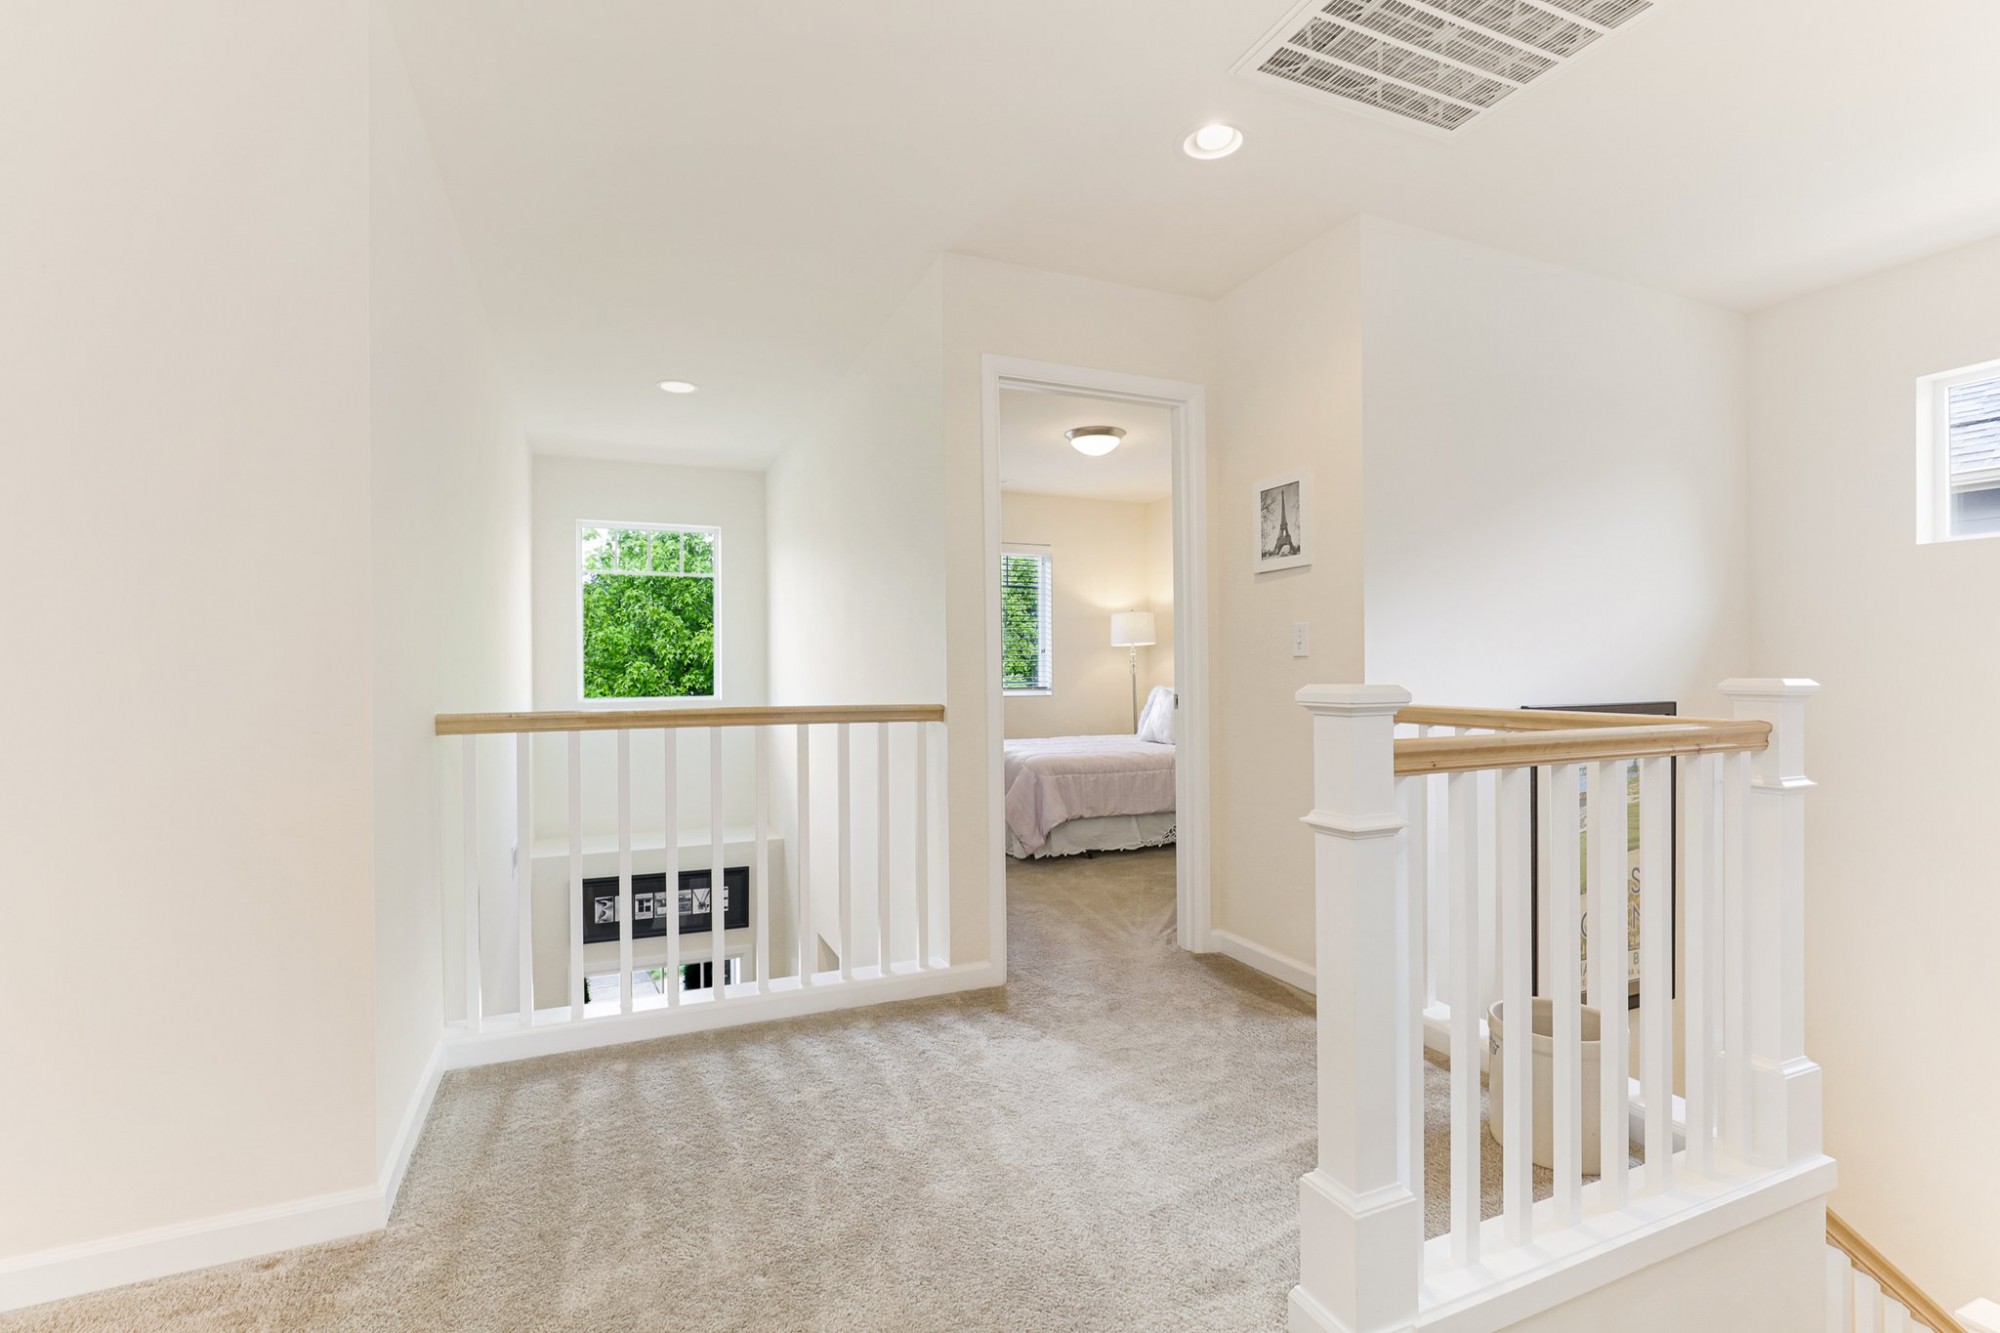 Upper level overlooks the entry and features beautiful railings.